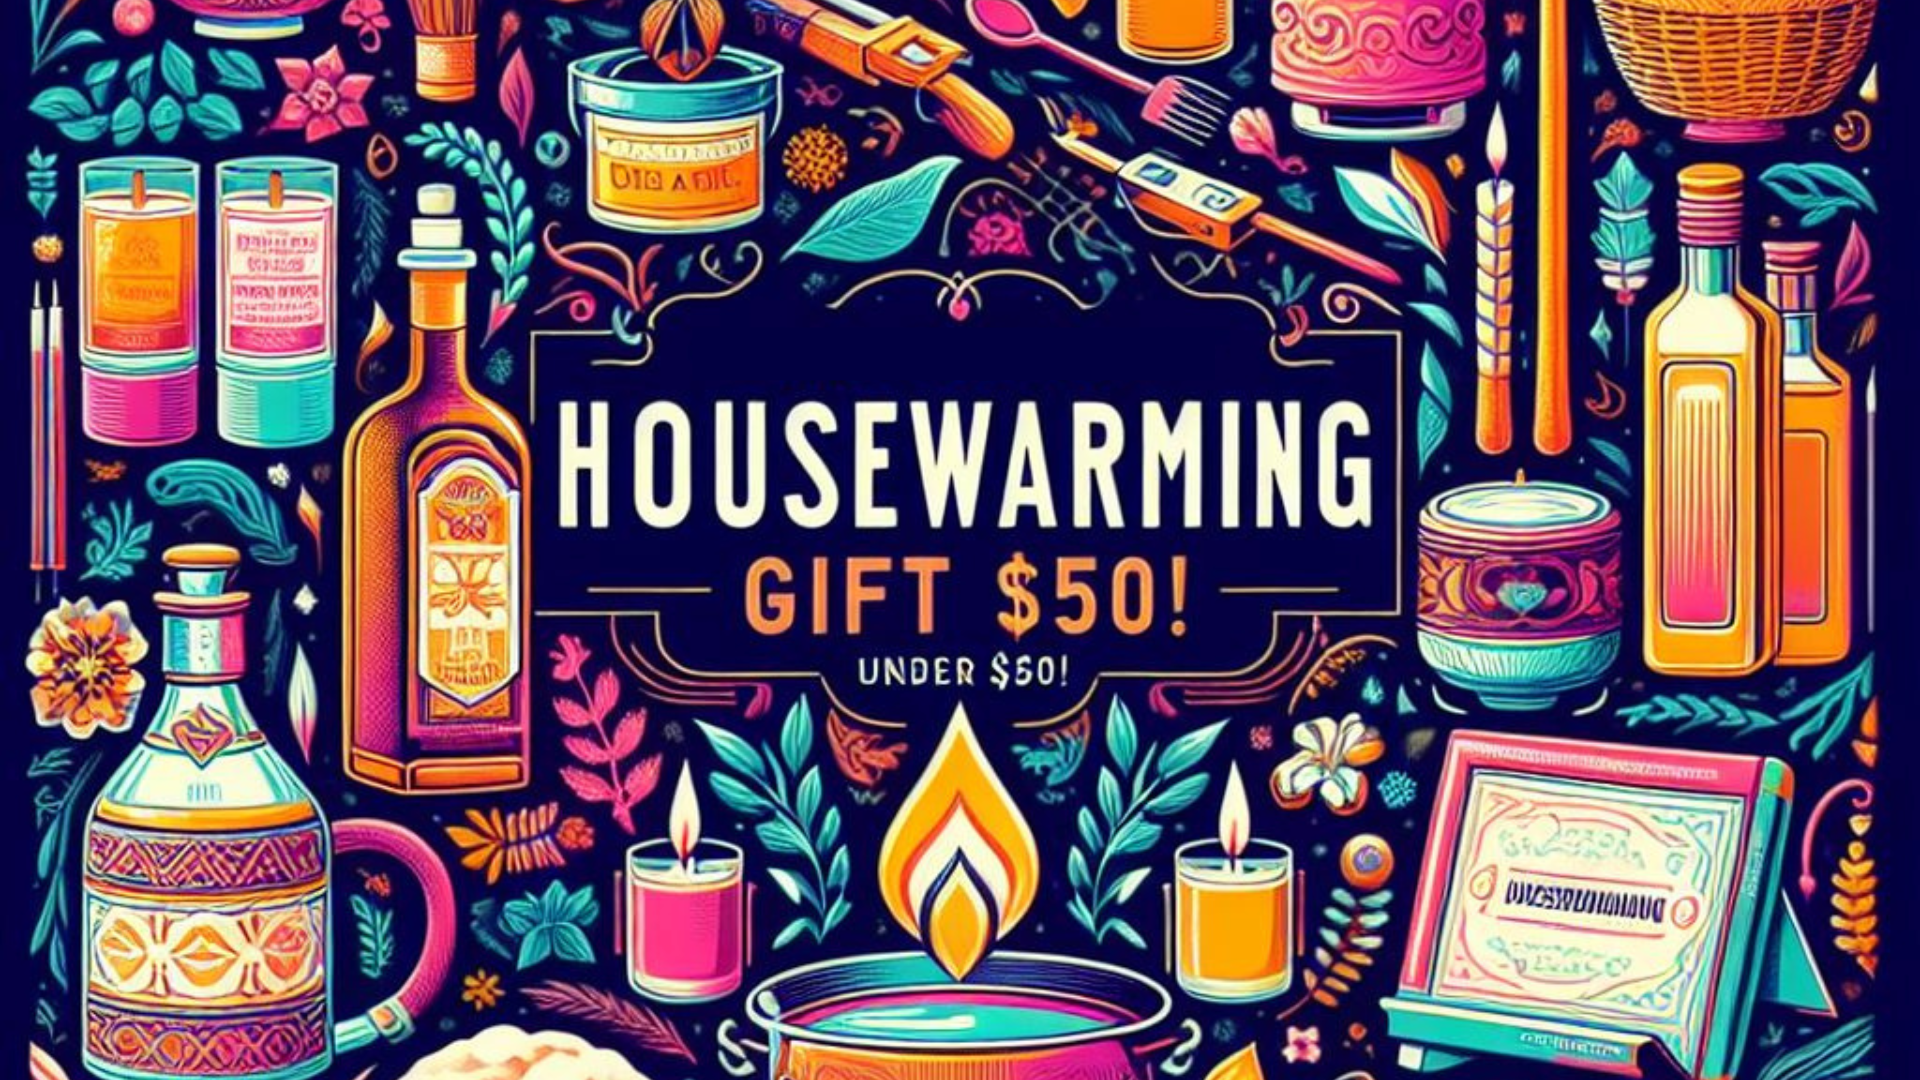 Explore a range of affordable and thoughtful housewarming gift ideas under $50, perfect for welcoming friends and family to their new home.